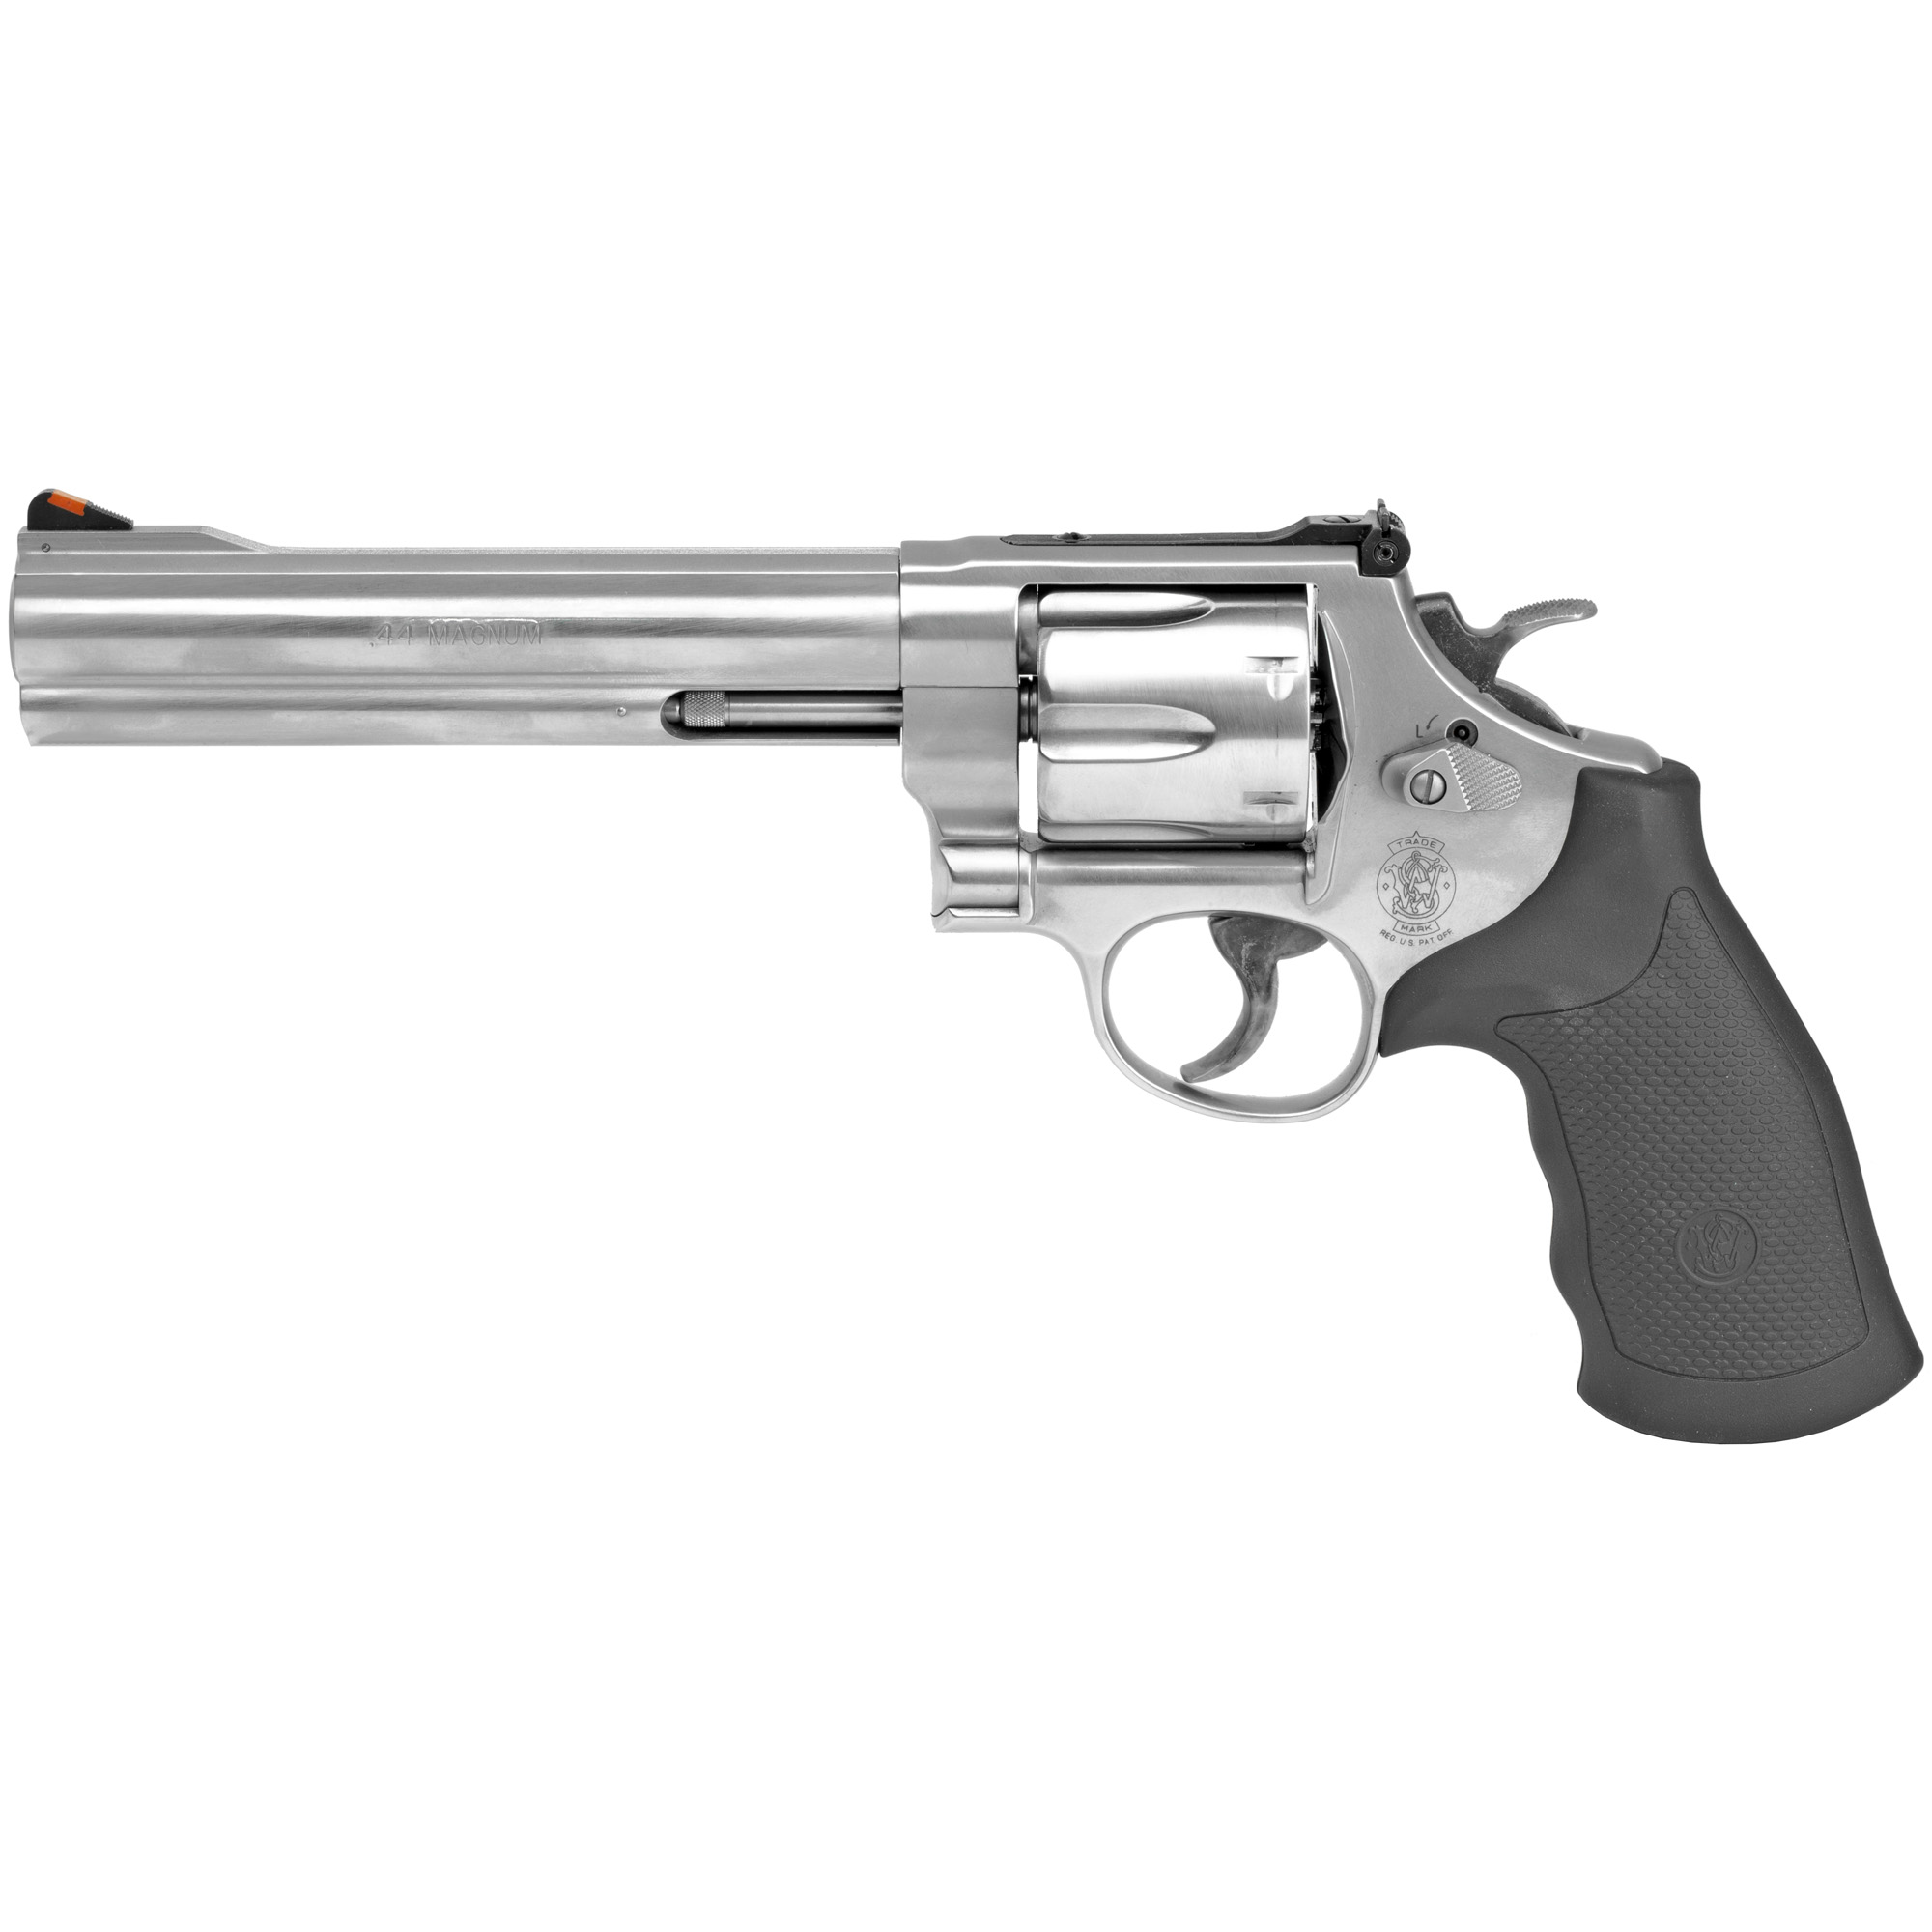 S&W 629-6 44MAG 6.5 6RD CLASSIC